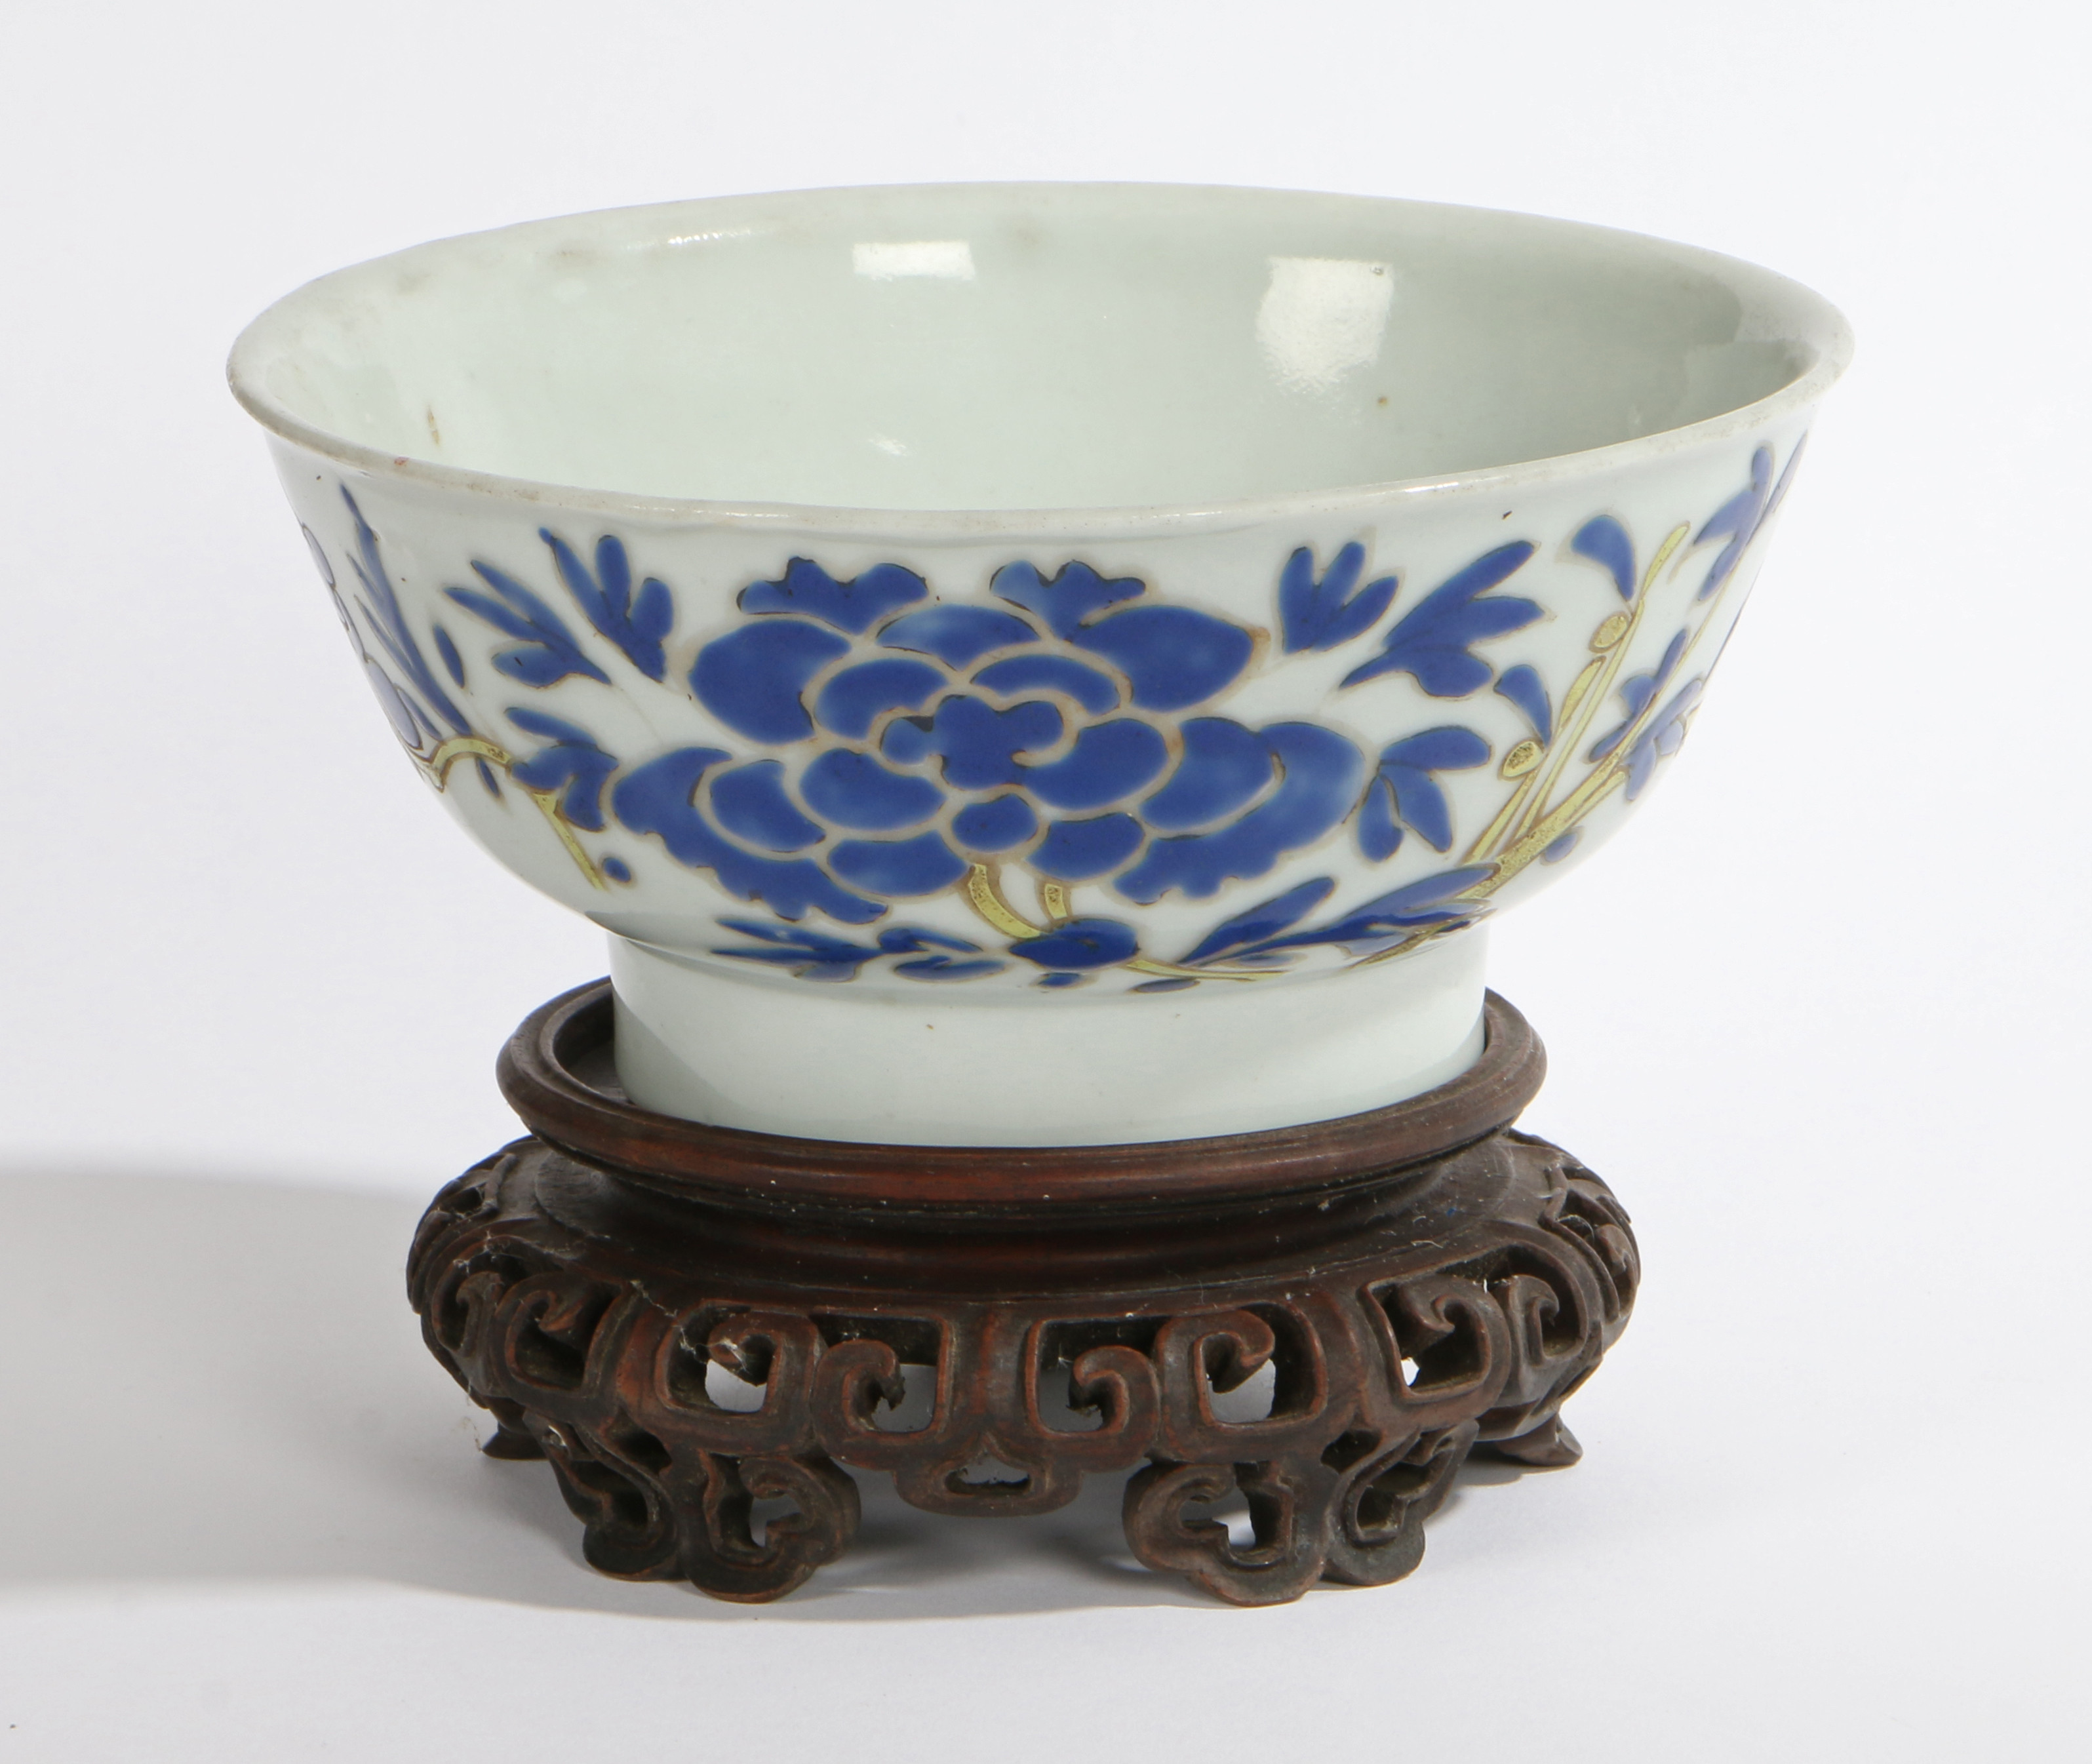 A CHINESE QING DYNASTY PORCELAIN BOWL.